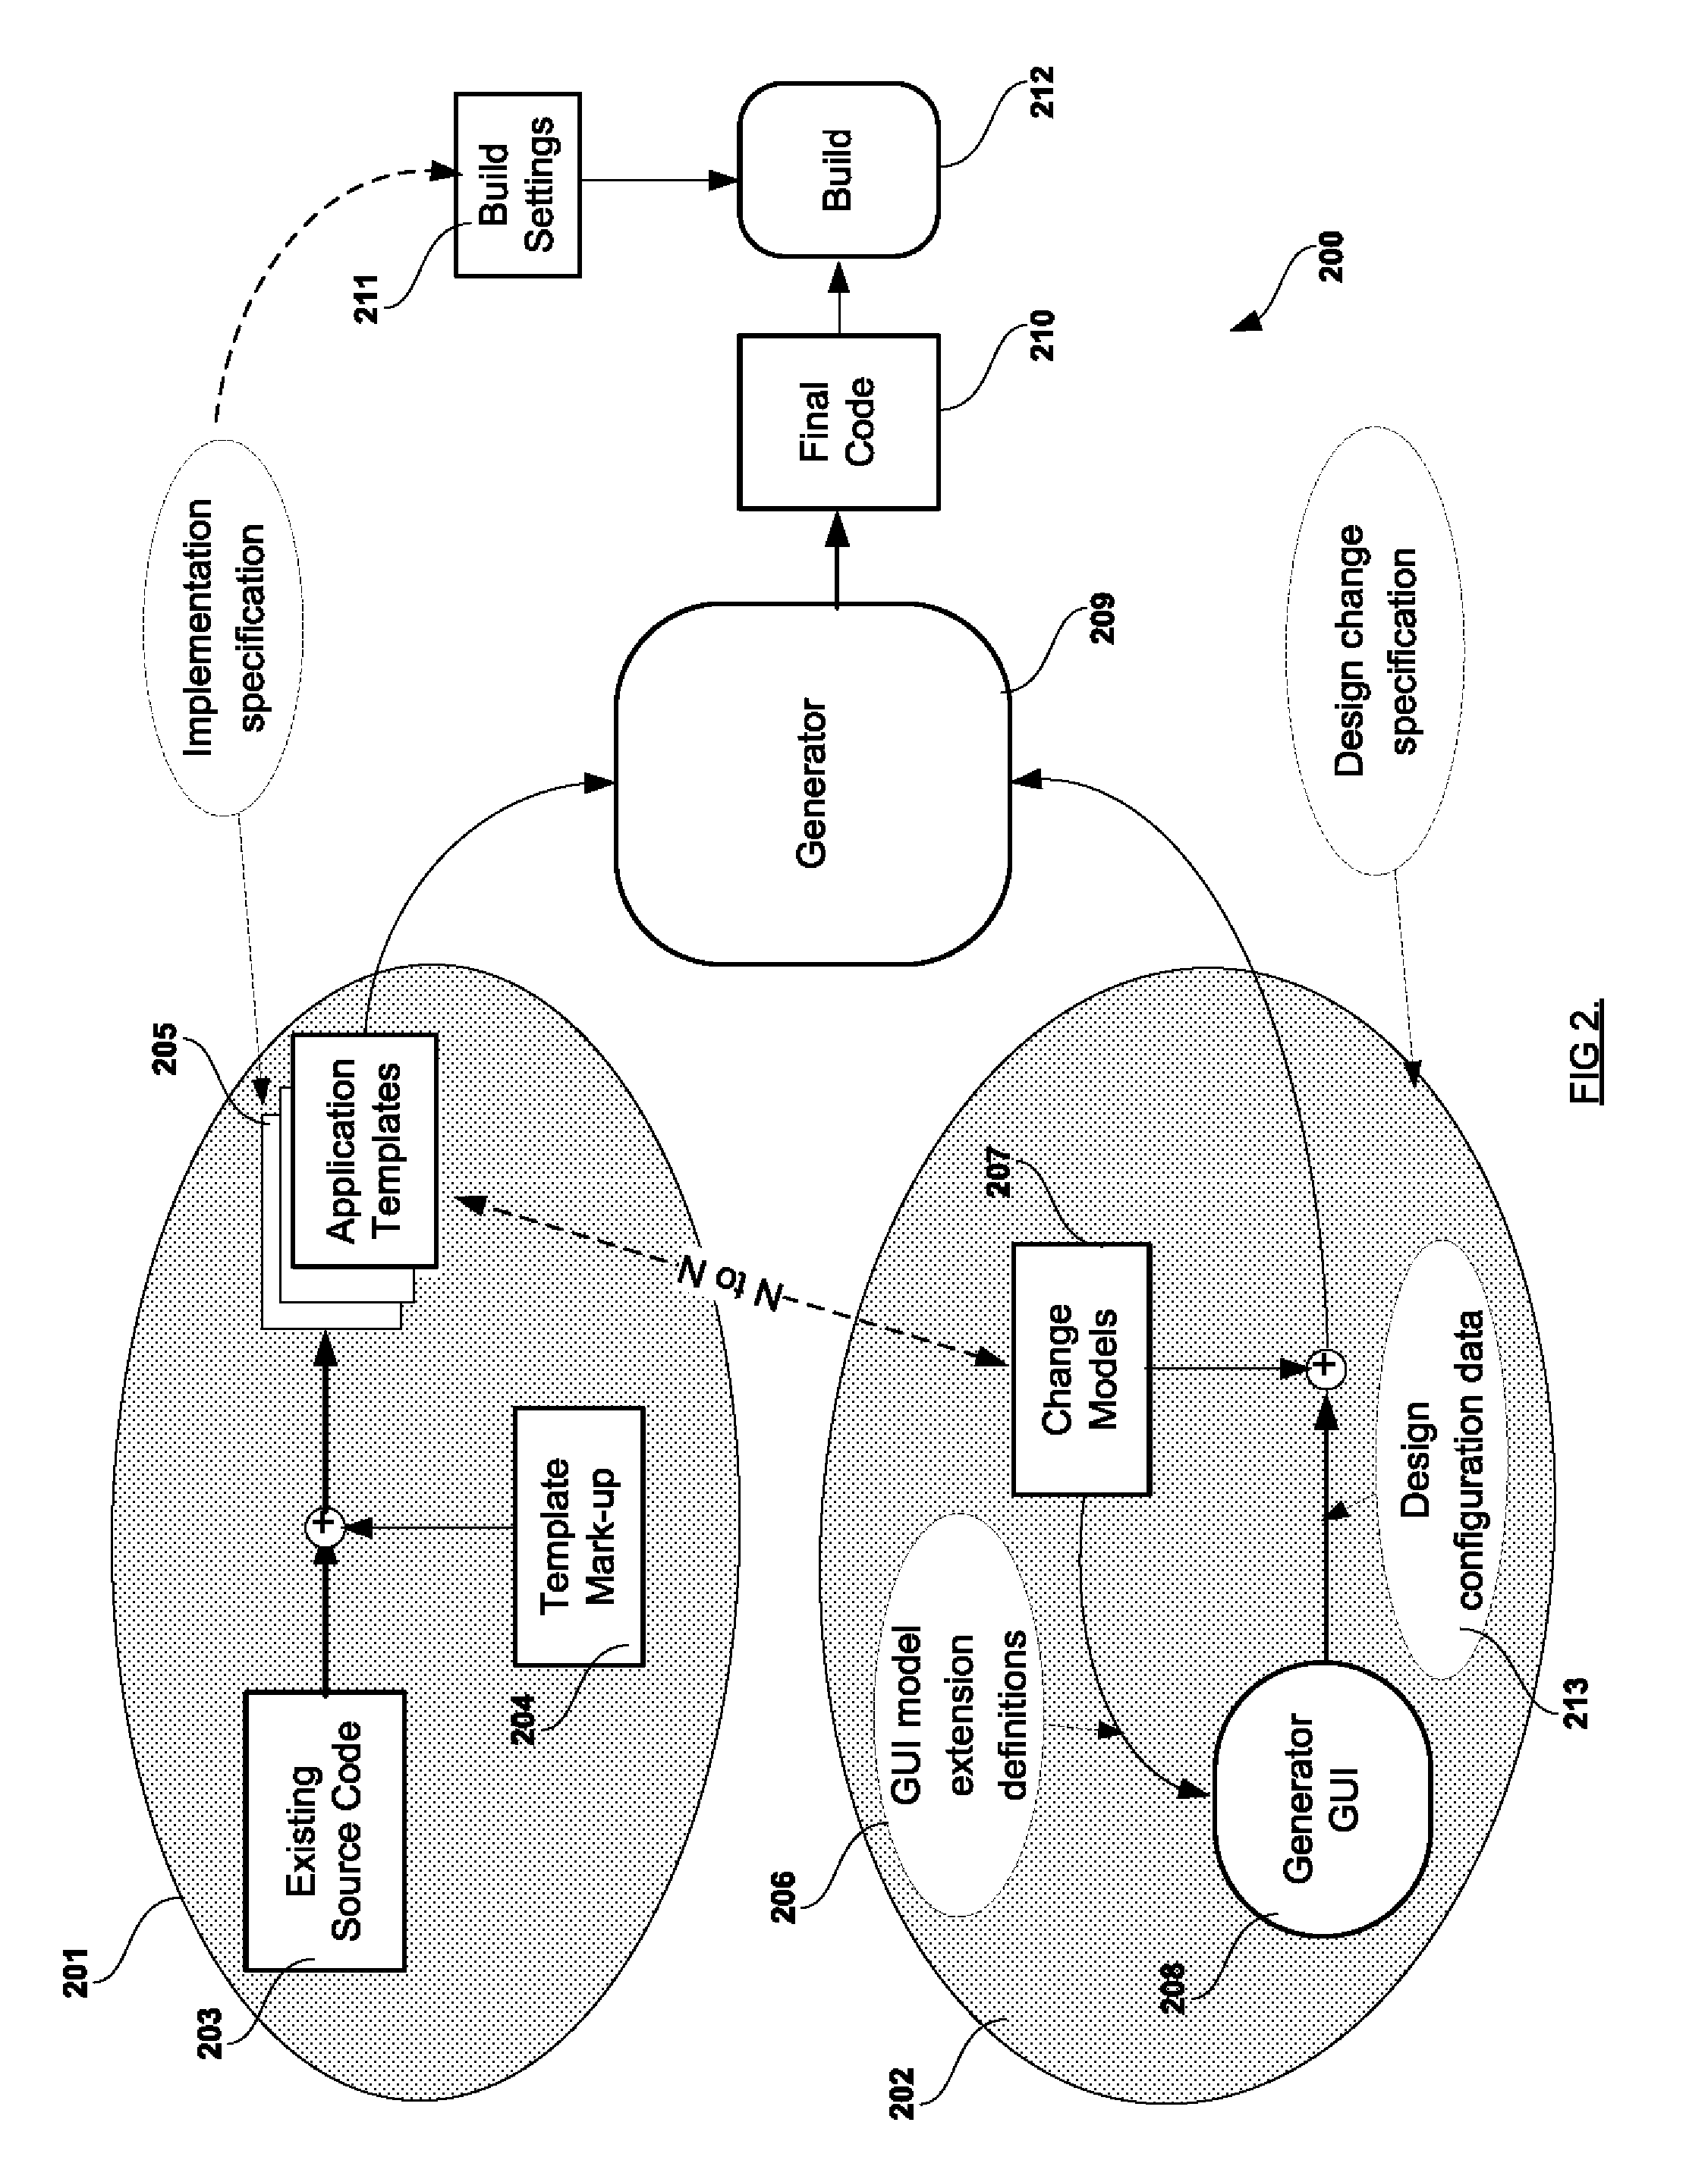 System and Method for Generating Modified Source Code Based on Change-Models